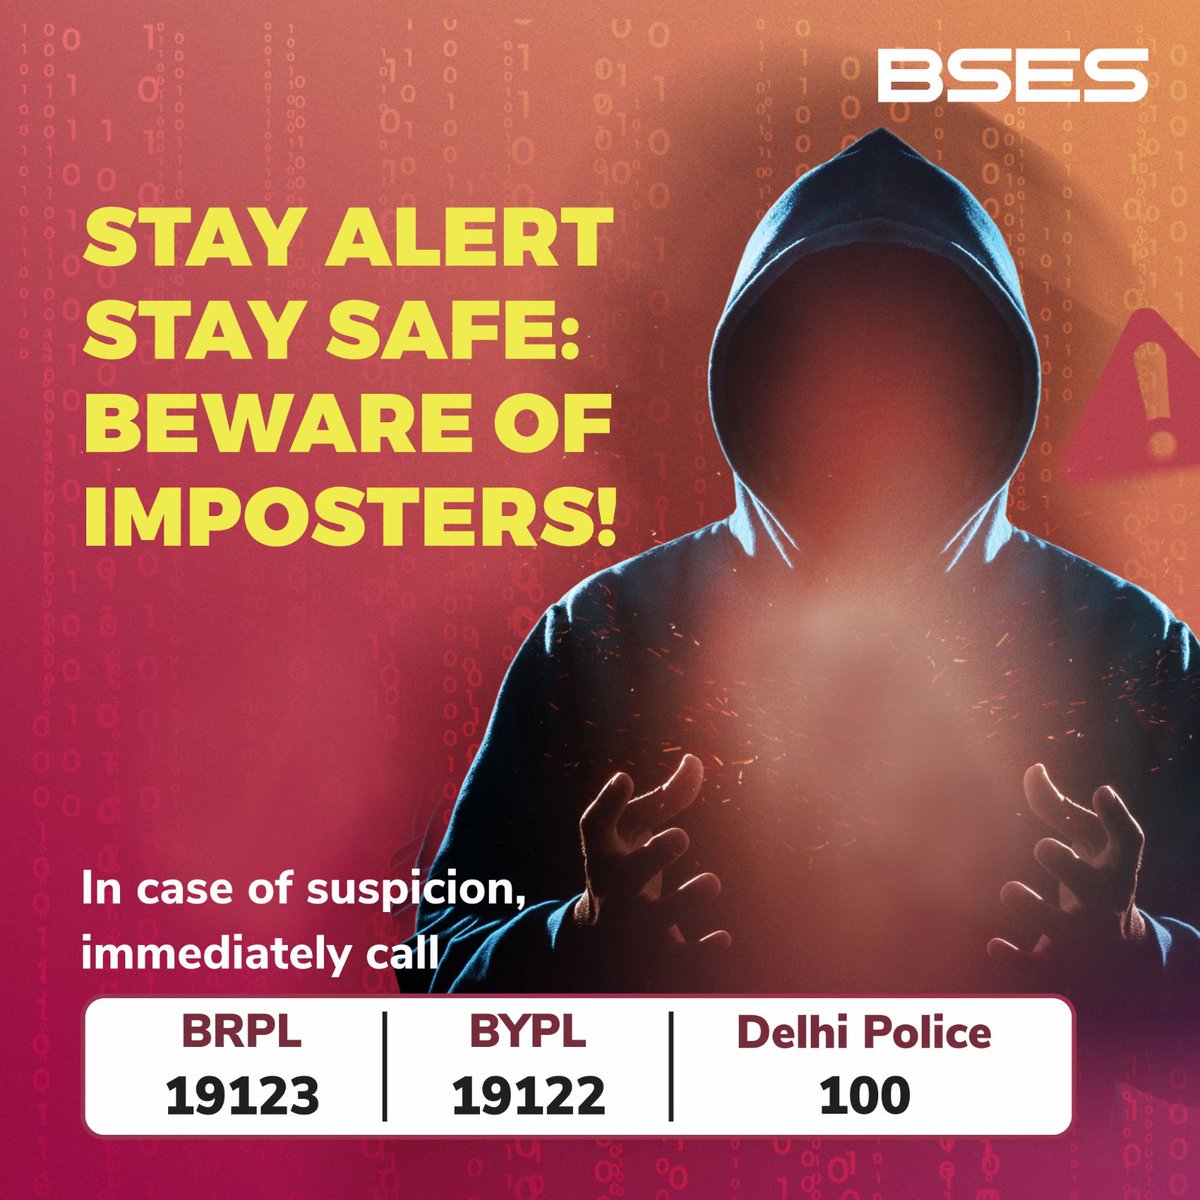 Beware of imposters masquerading as discom employees and representatives. These imposters may pressure you with threats and false promises, but remember: BSES representatives never accept cash payments at your home. Always verify ID cards carefully and report any suspicious